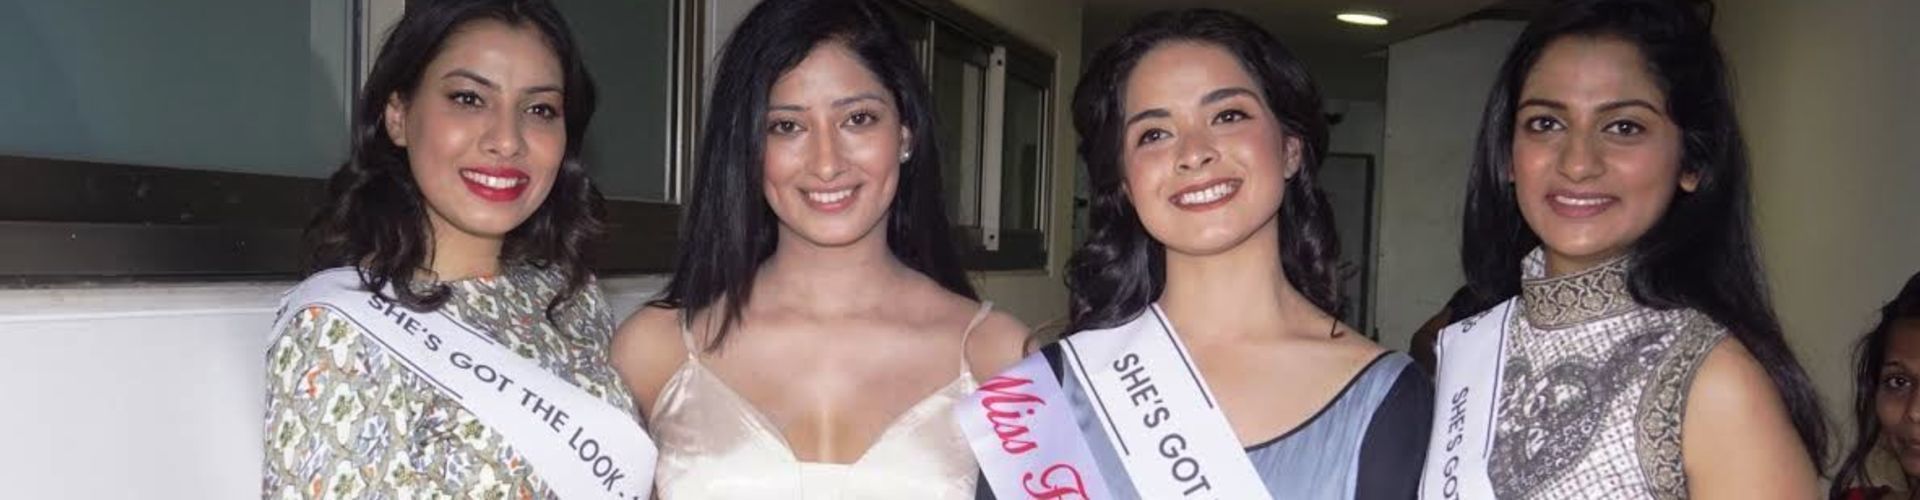 Beauty pageants are very important for entertainment industry, says Niharica Raizada